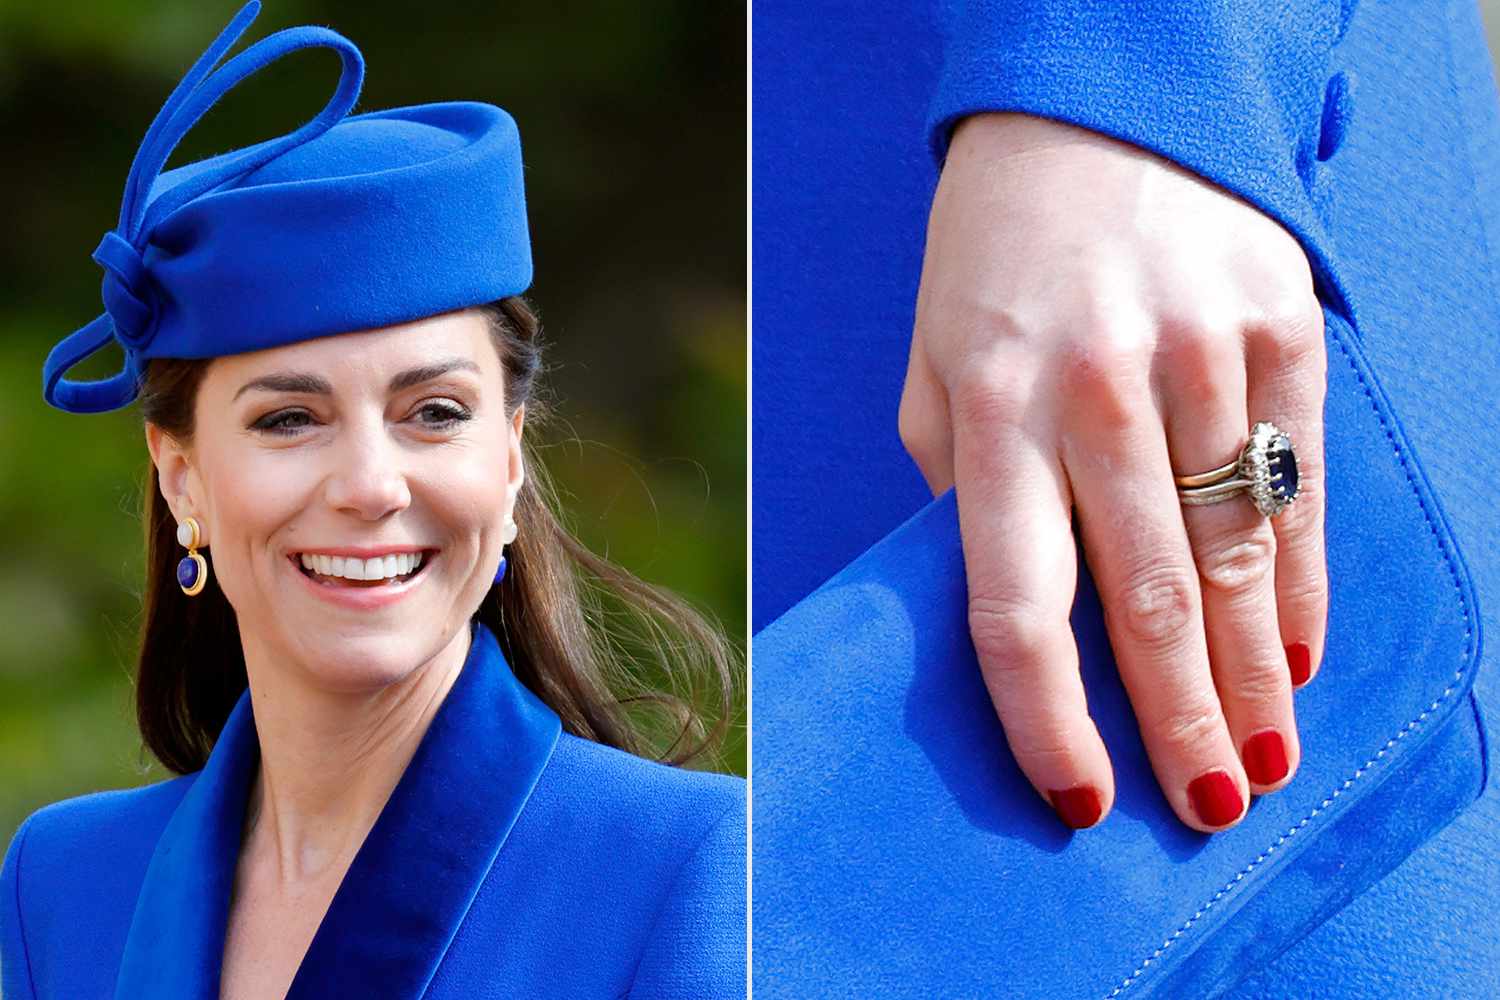 Get the Look: Kate Middleton's Red Royal Attire is the Ultimate Formal Fashion Inspiration 17